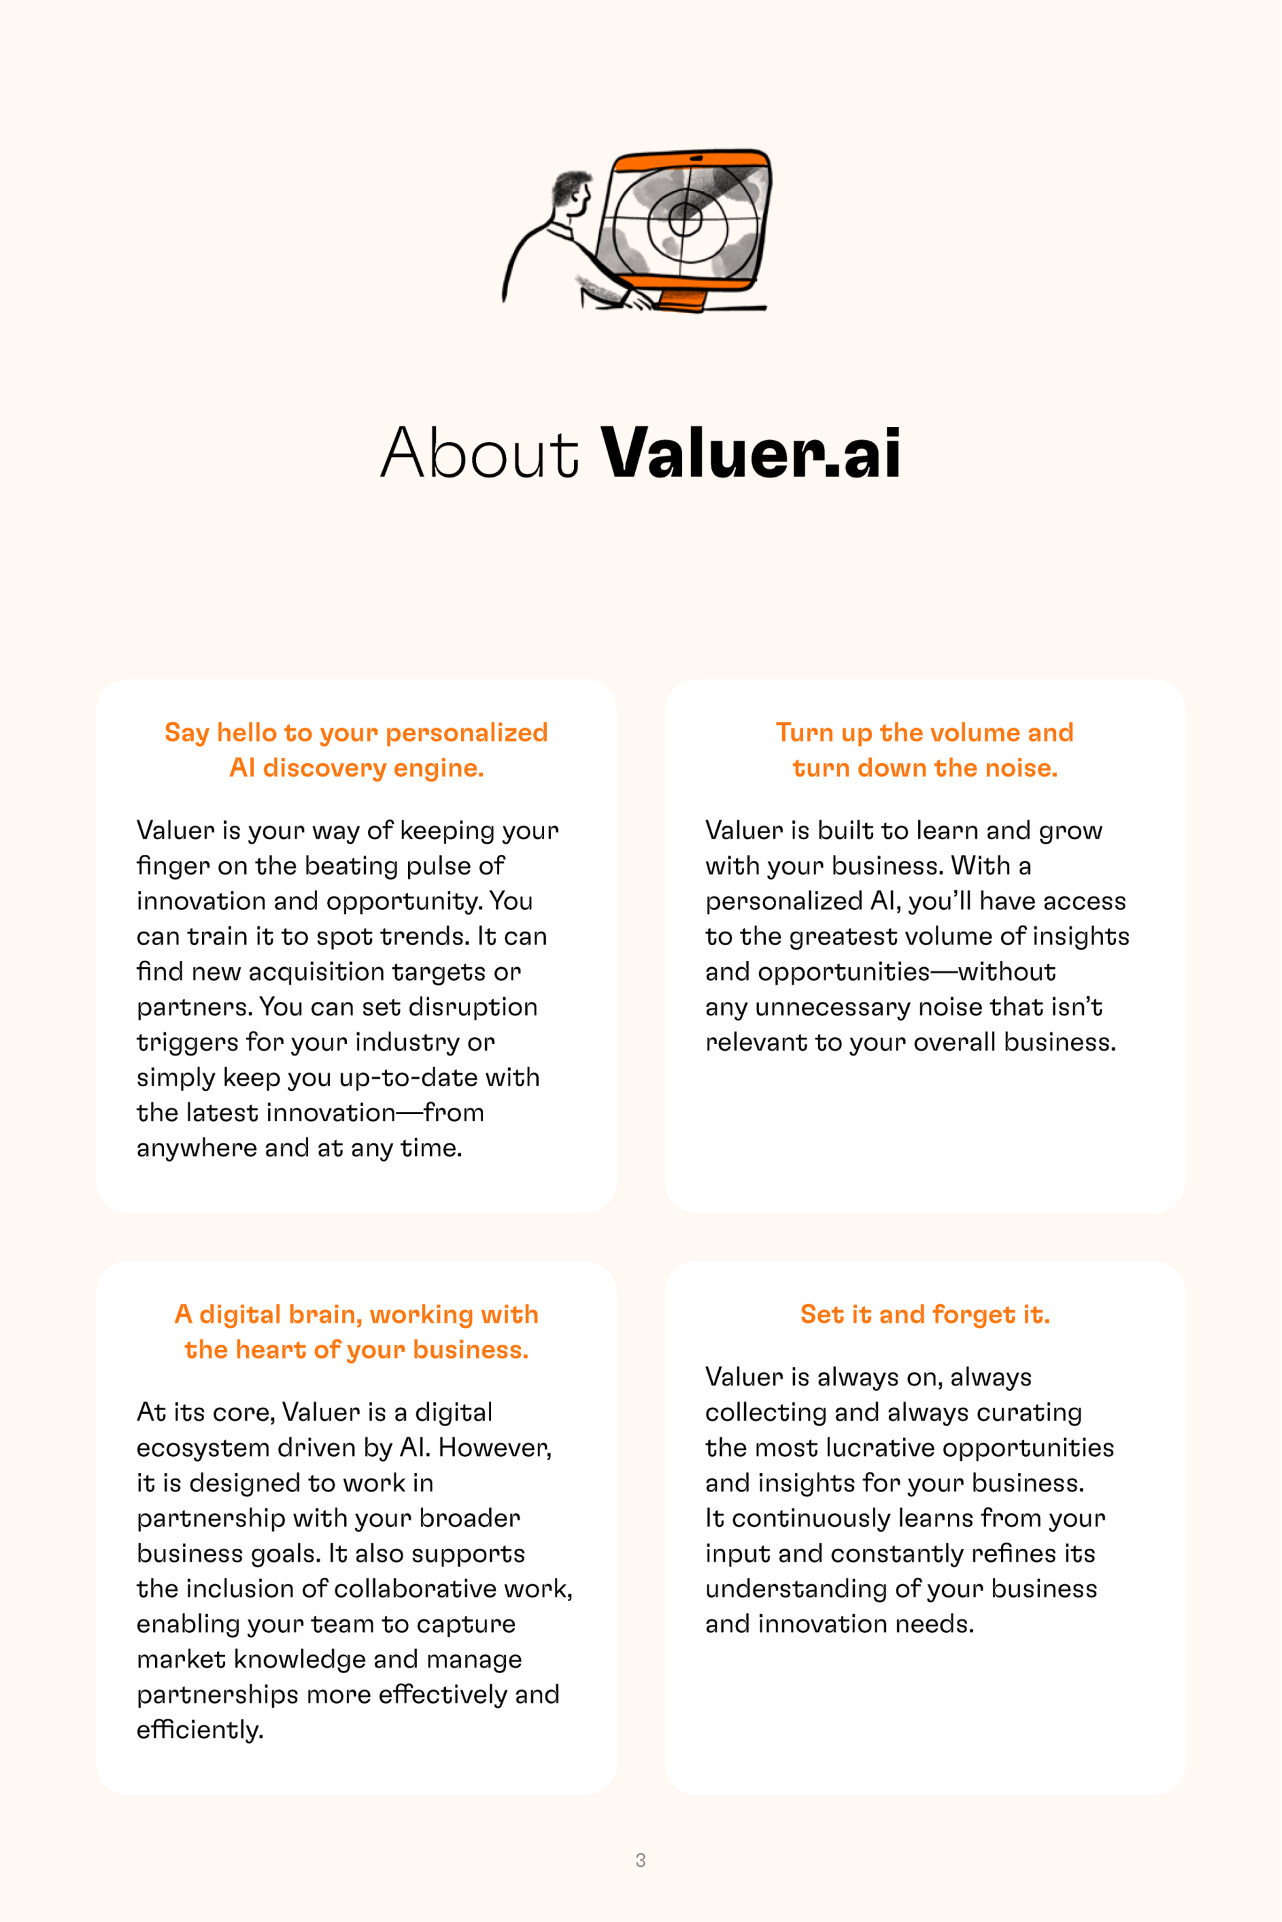 About Valuer.ai